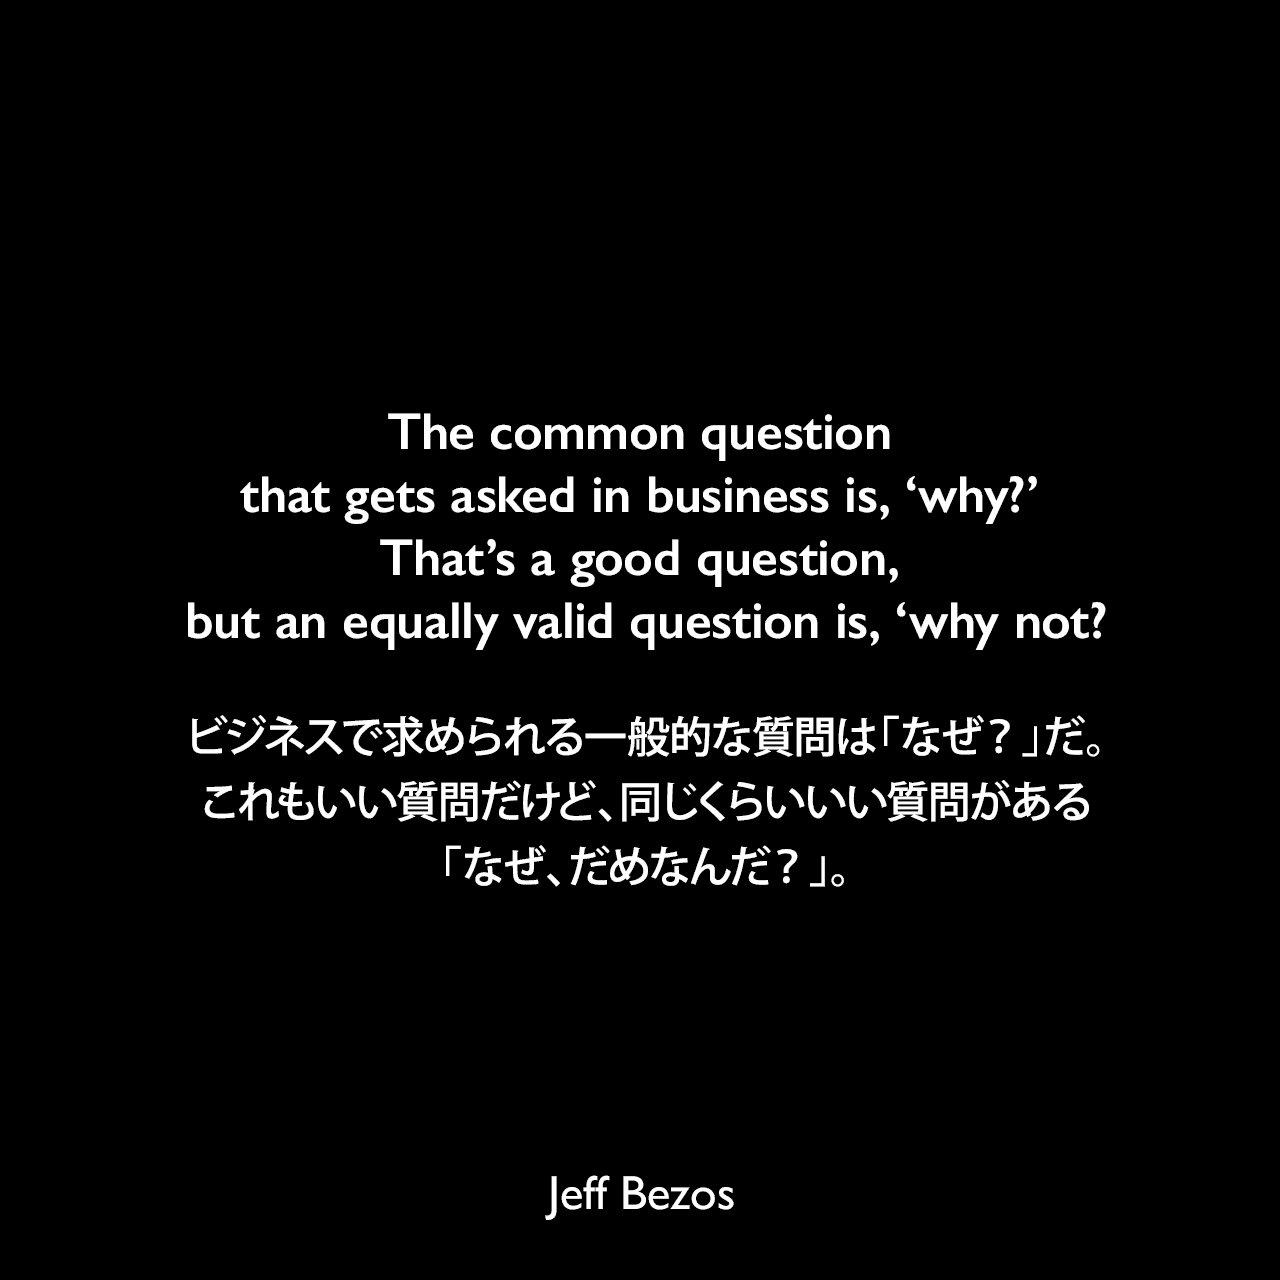 The common question that gets asked in business is, ‘why?’ That’s a good question, but an equally valid question is, ‘why not?ビジネスで求められる一般的な質問は「なぜ？」だ。これもいい質問だけど、同じくらいいい質問がある「なぜ、だめなんだ？」。Jeff Bezos